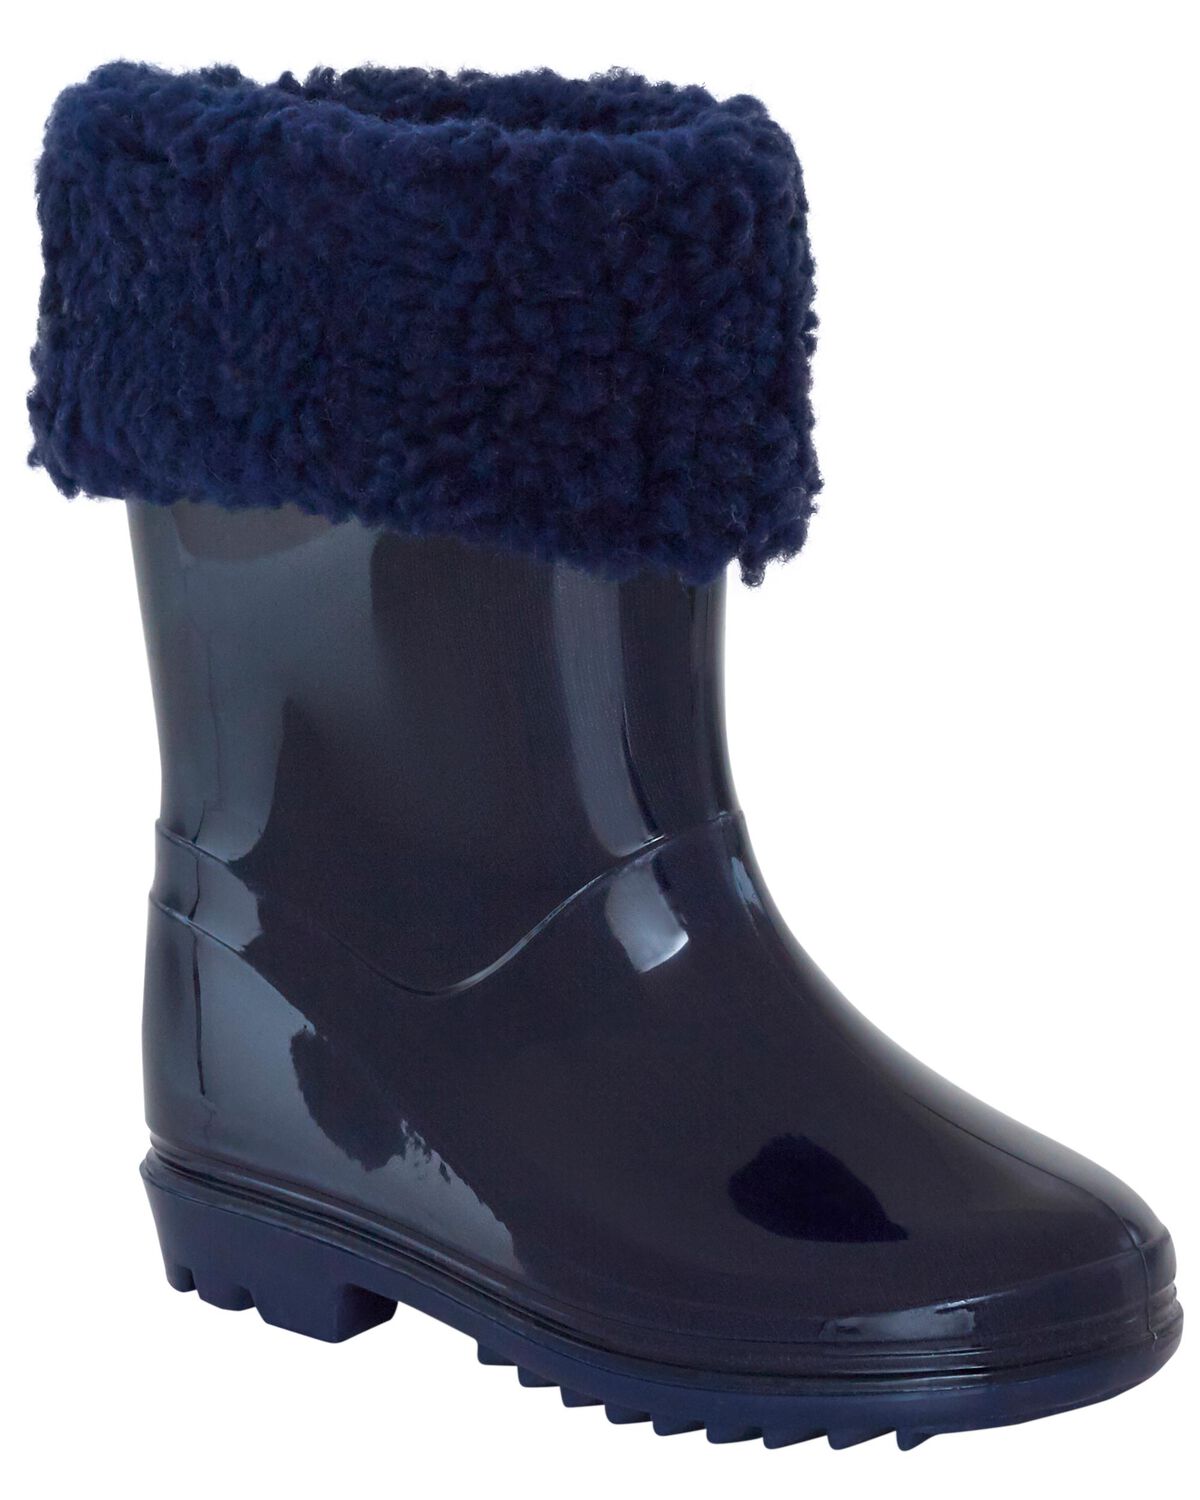 Navy Toddler Faux Fur-Lined Rain Boots | carters.com